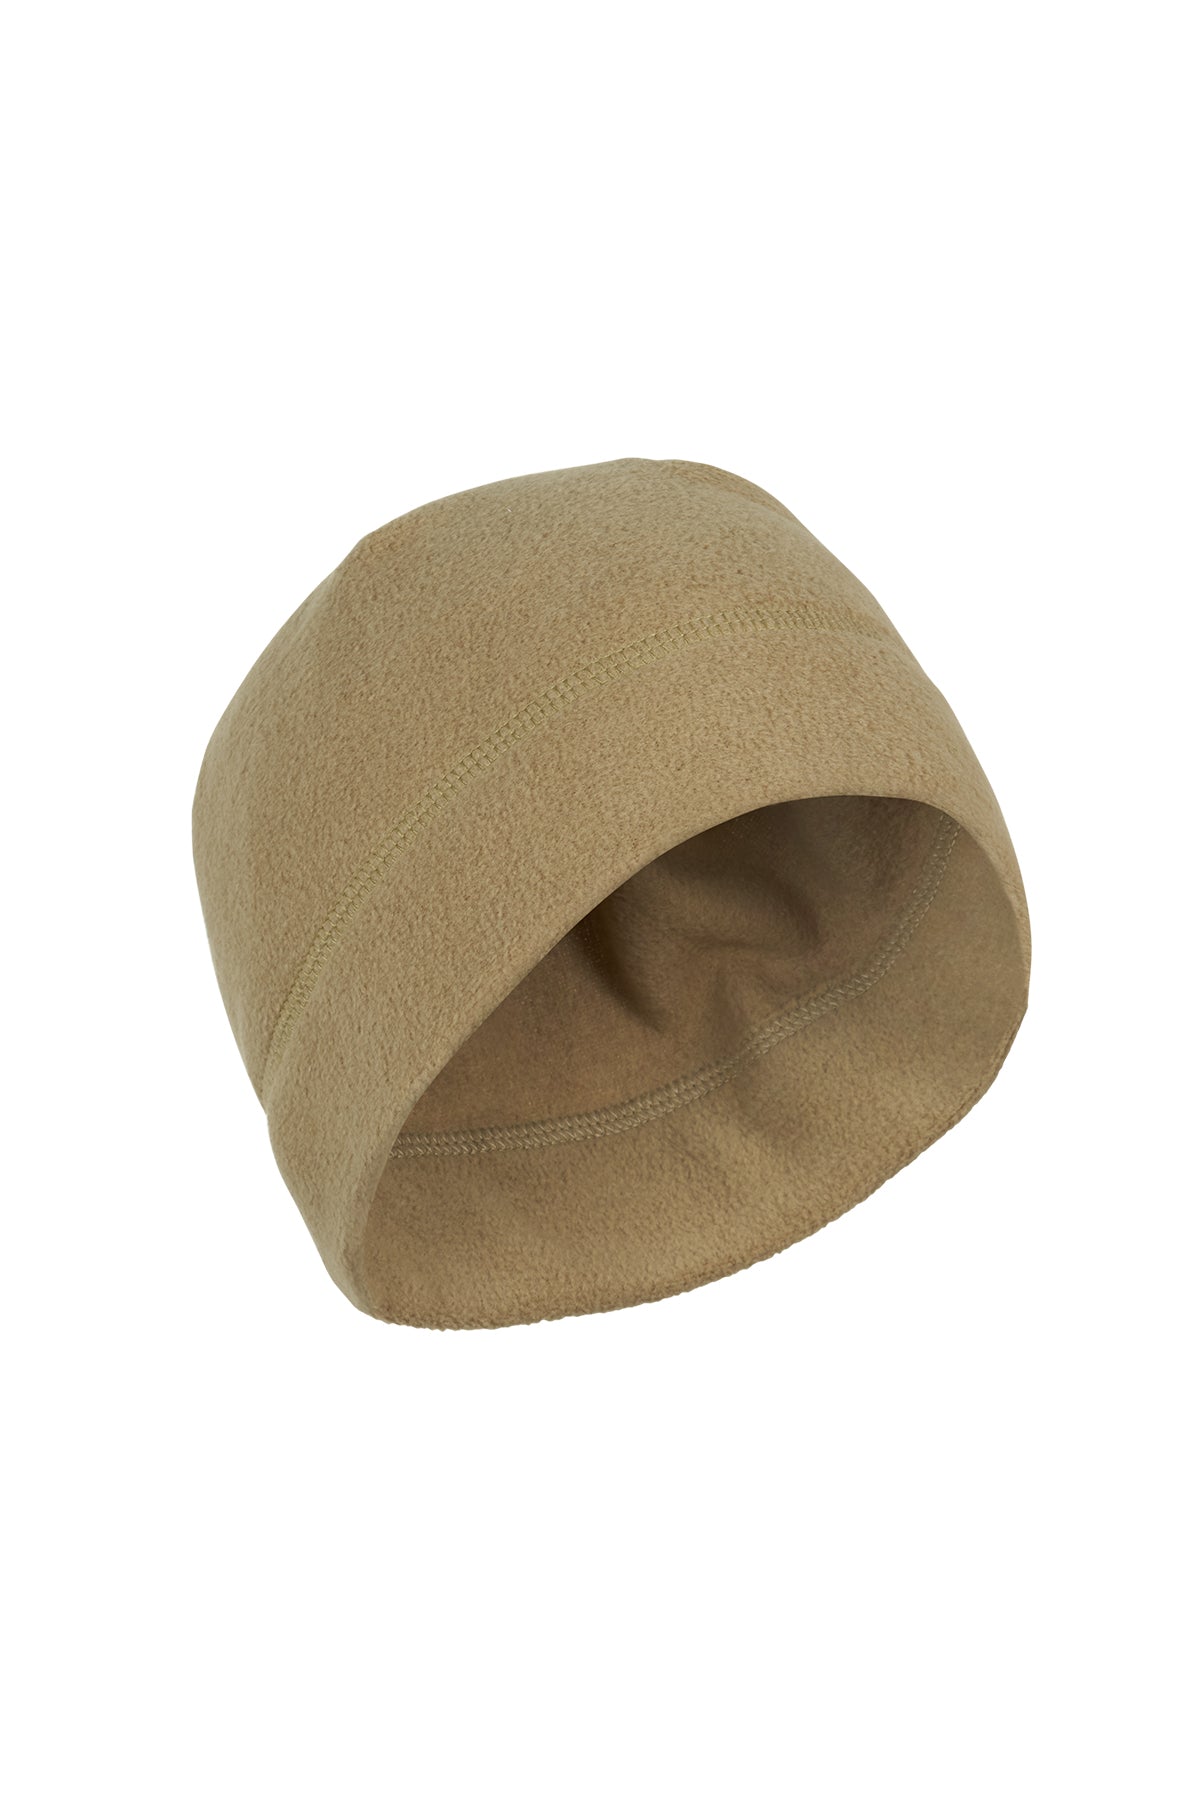 Wholesale Thermal Unisex Hats for Men & Women Army Grade Fleece Thermal Hats - Sand